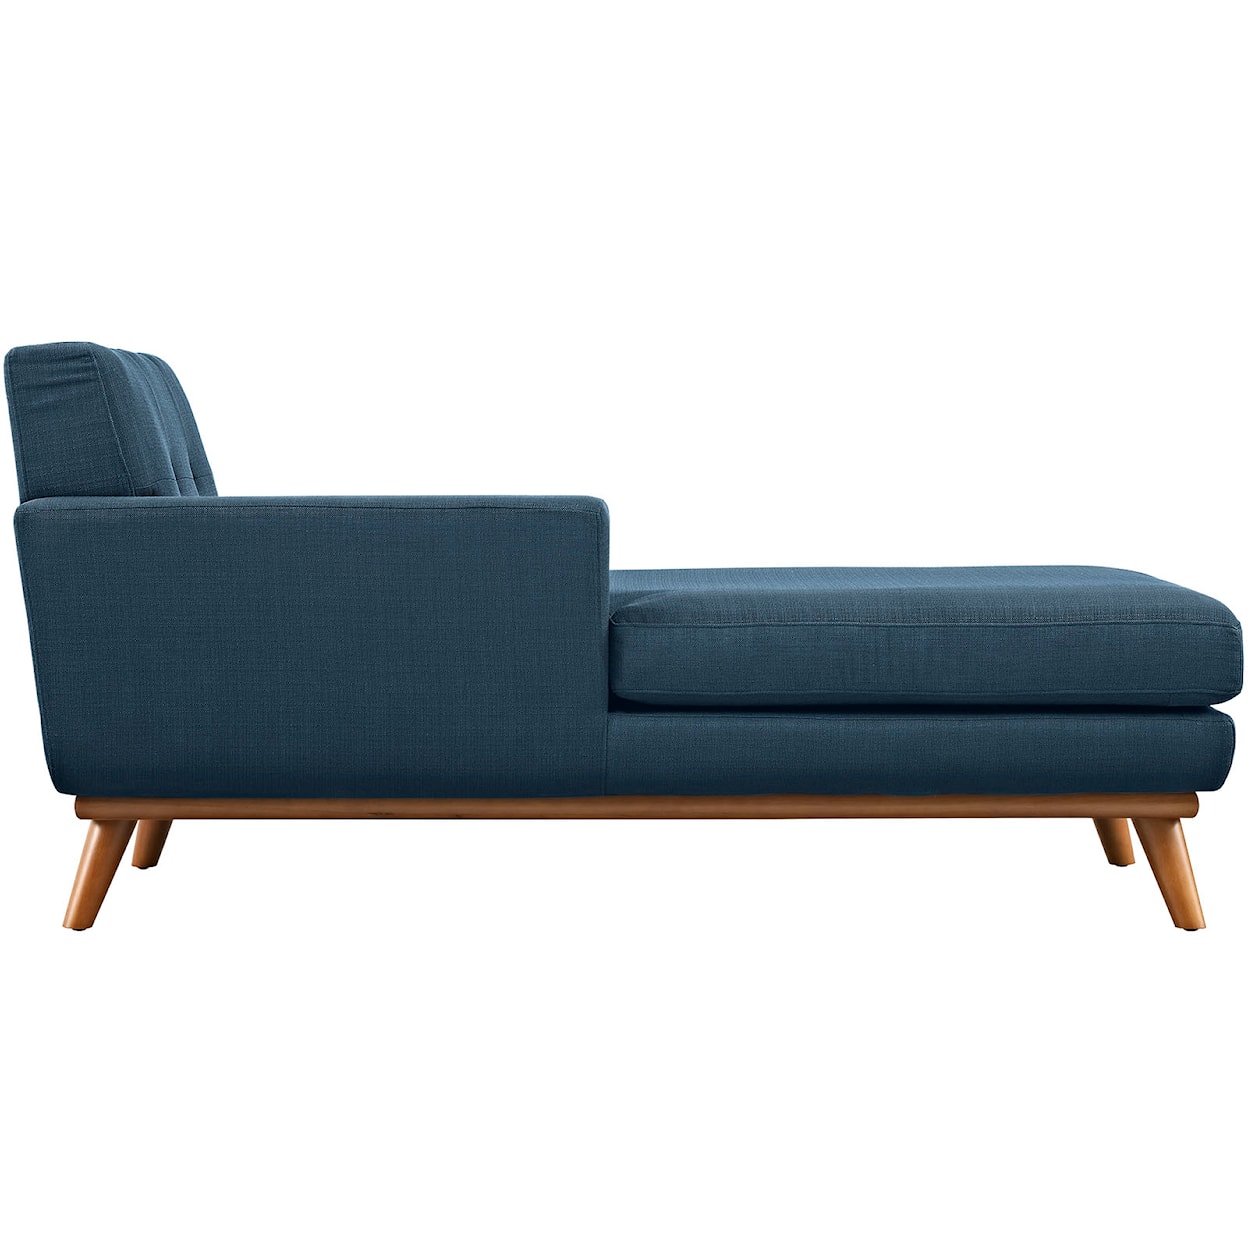 Modway Engage Left-Facing Chaise